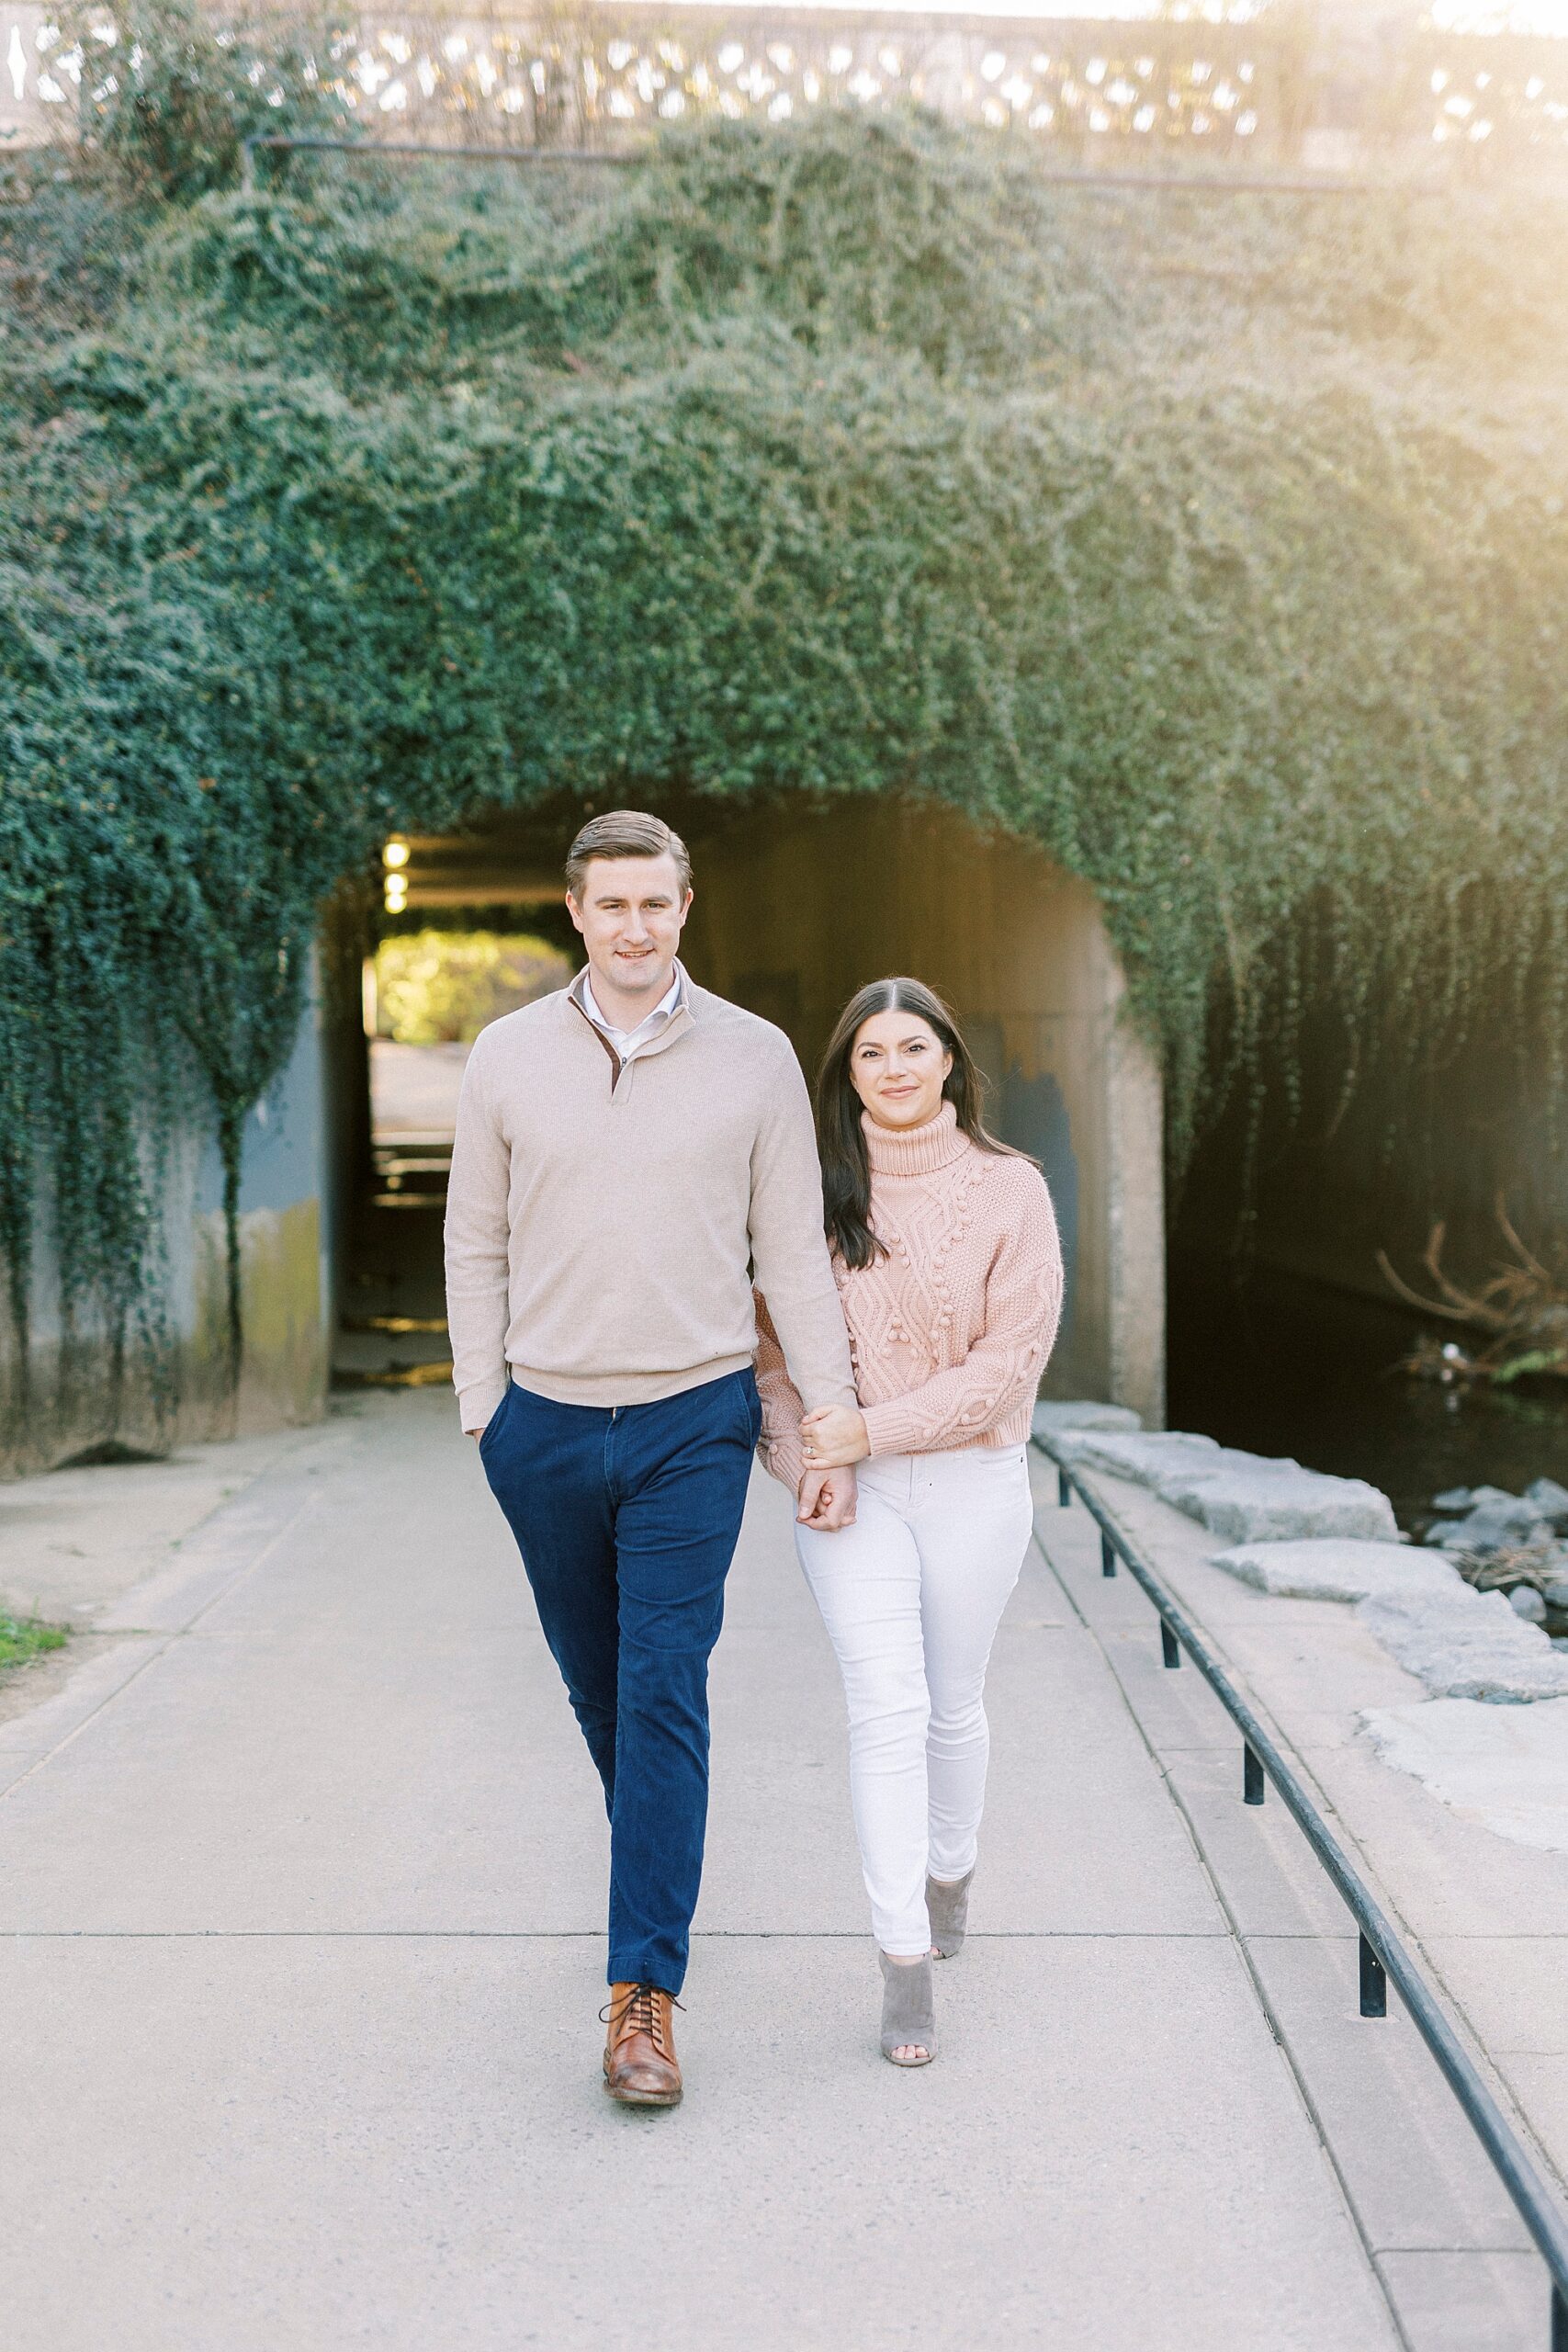 engaged couple walks together across pathway in park